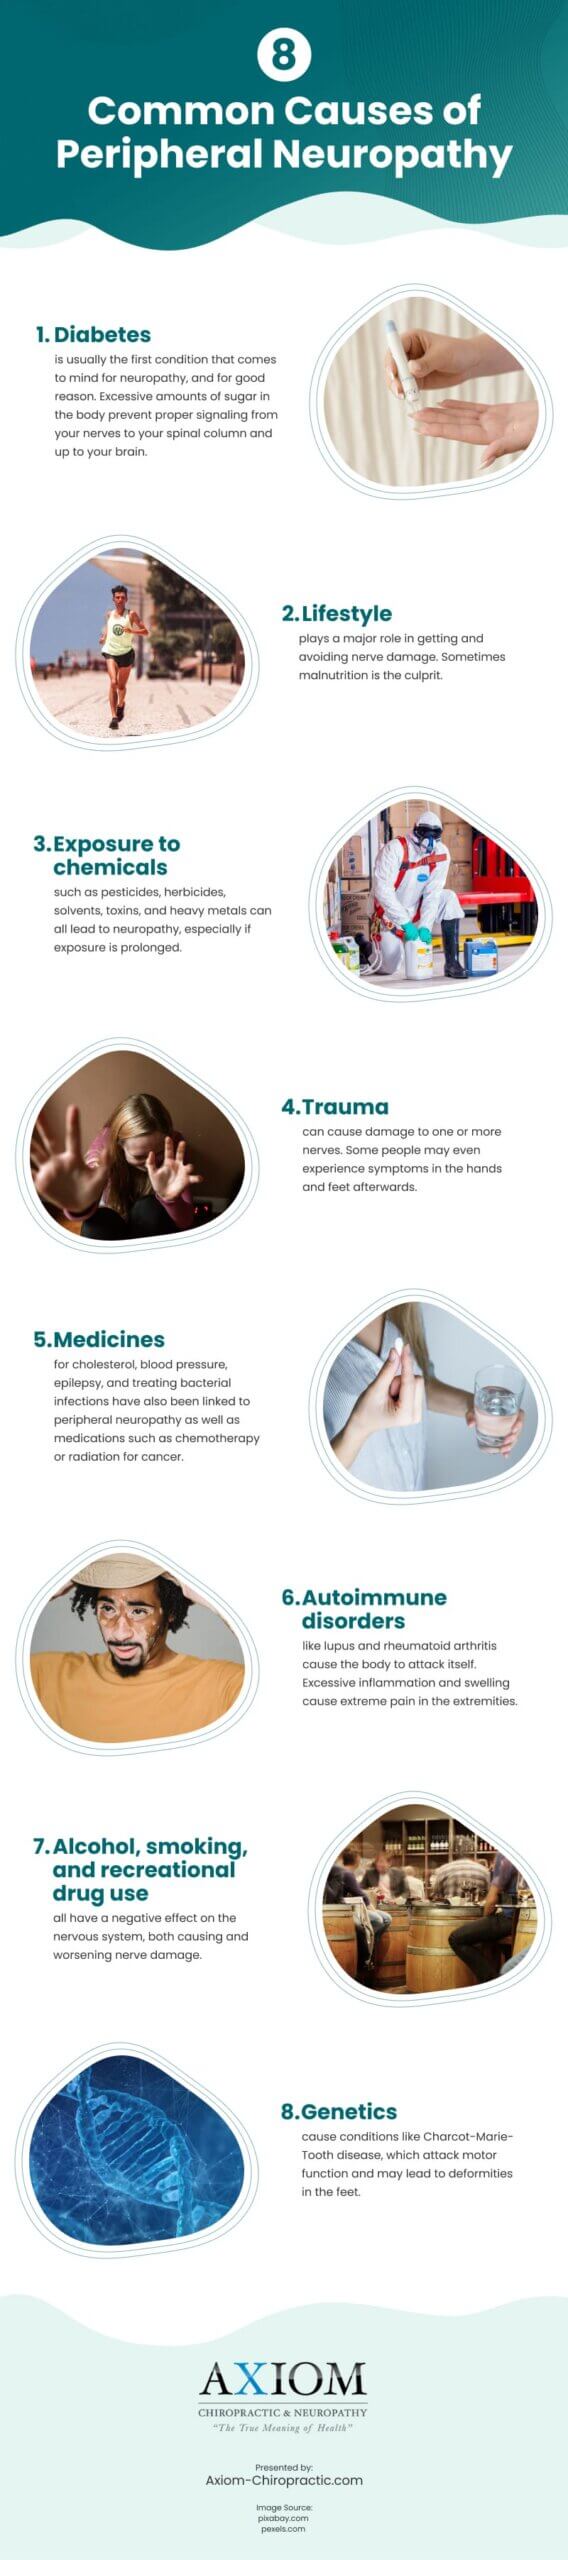 8 Common Causes of Peripheral Neuropathy Infographic